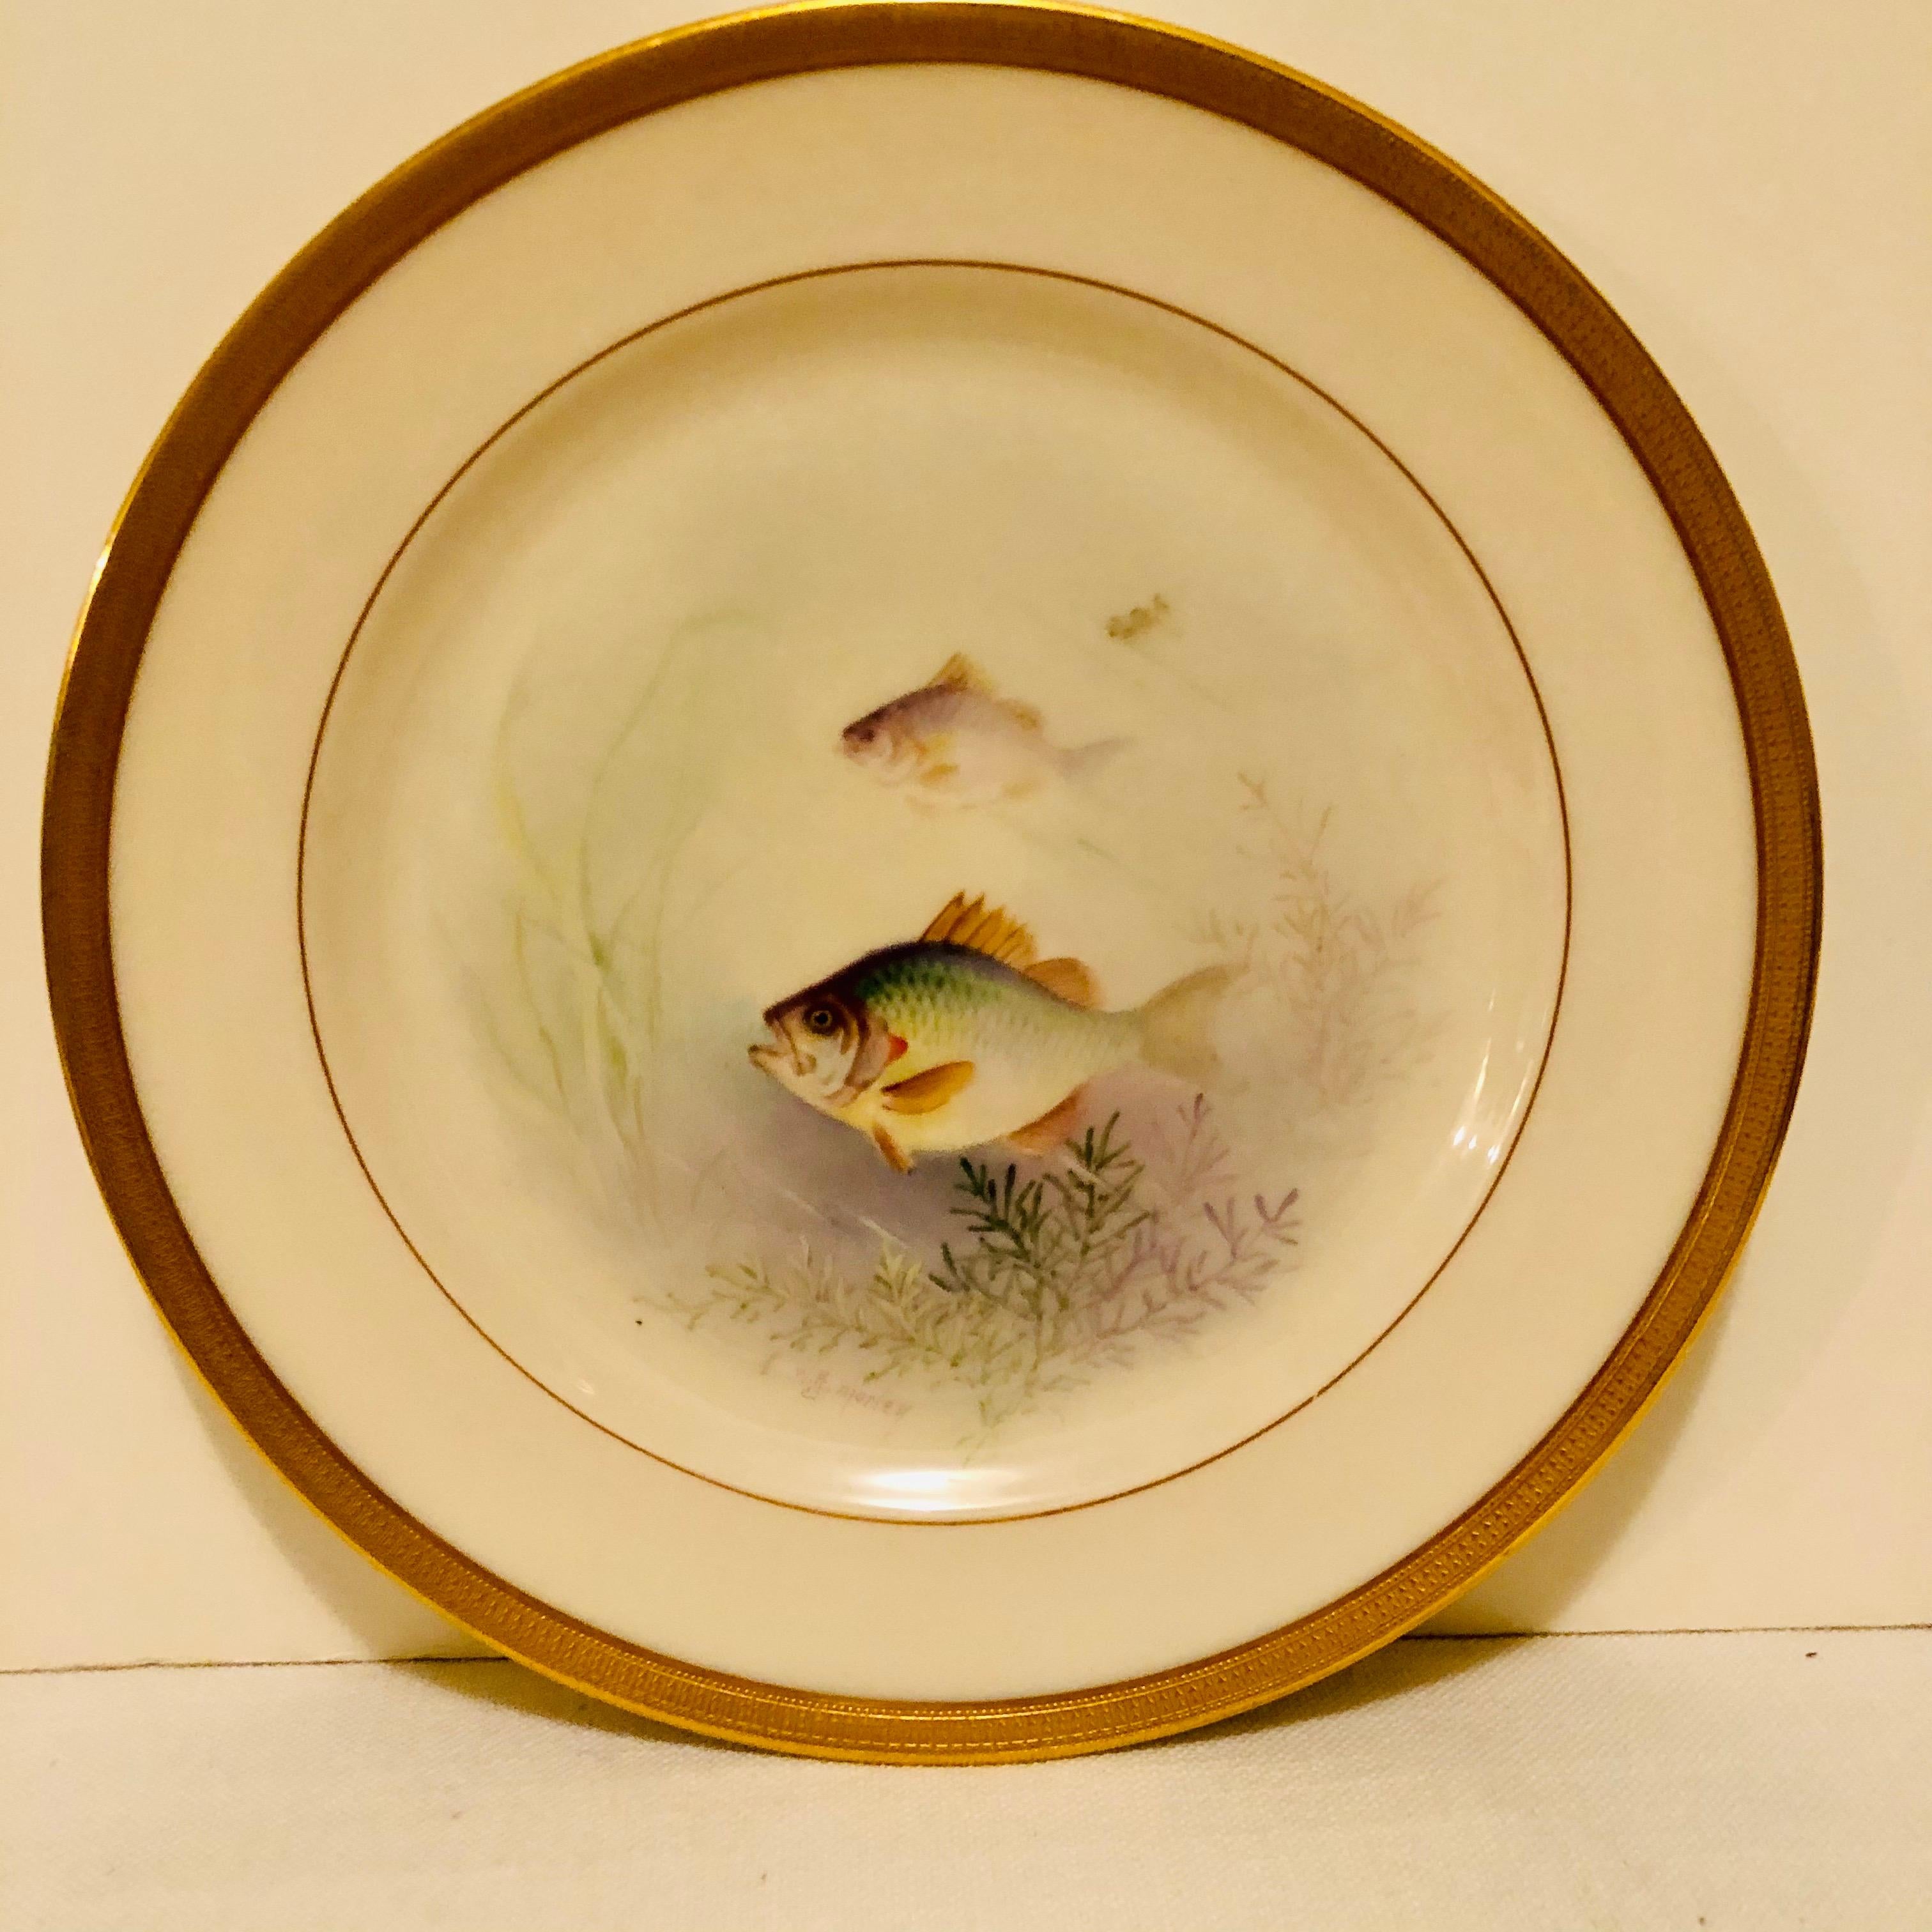 Hand-Painted Set of Lenox Fish Plates Each Painted with Different Fish Artist Signed Morley